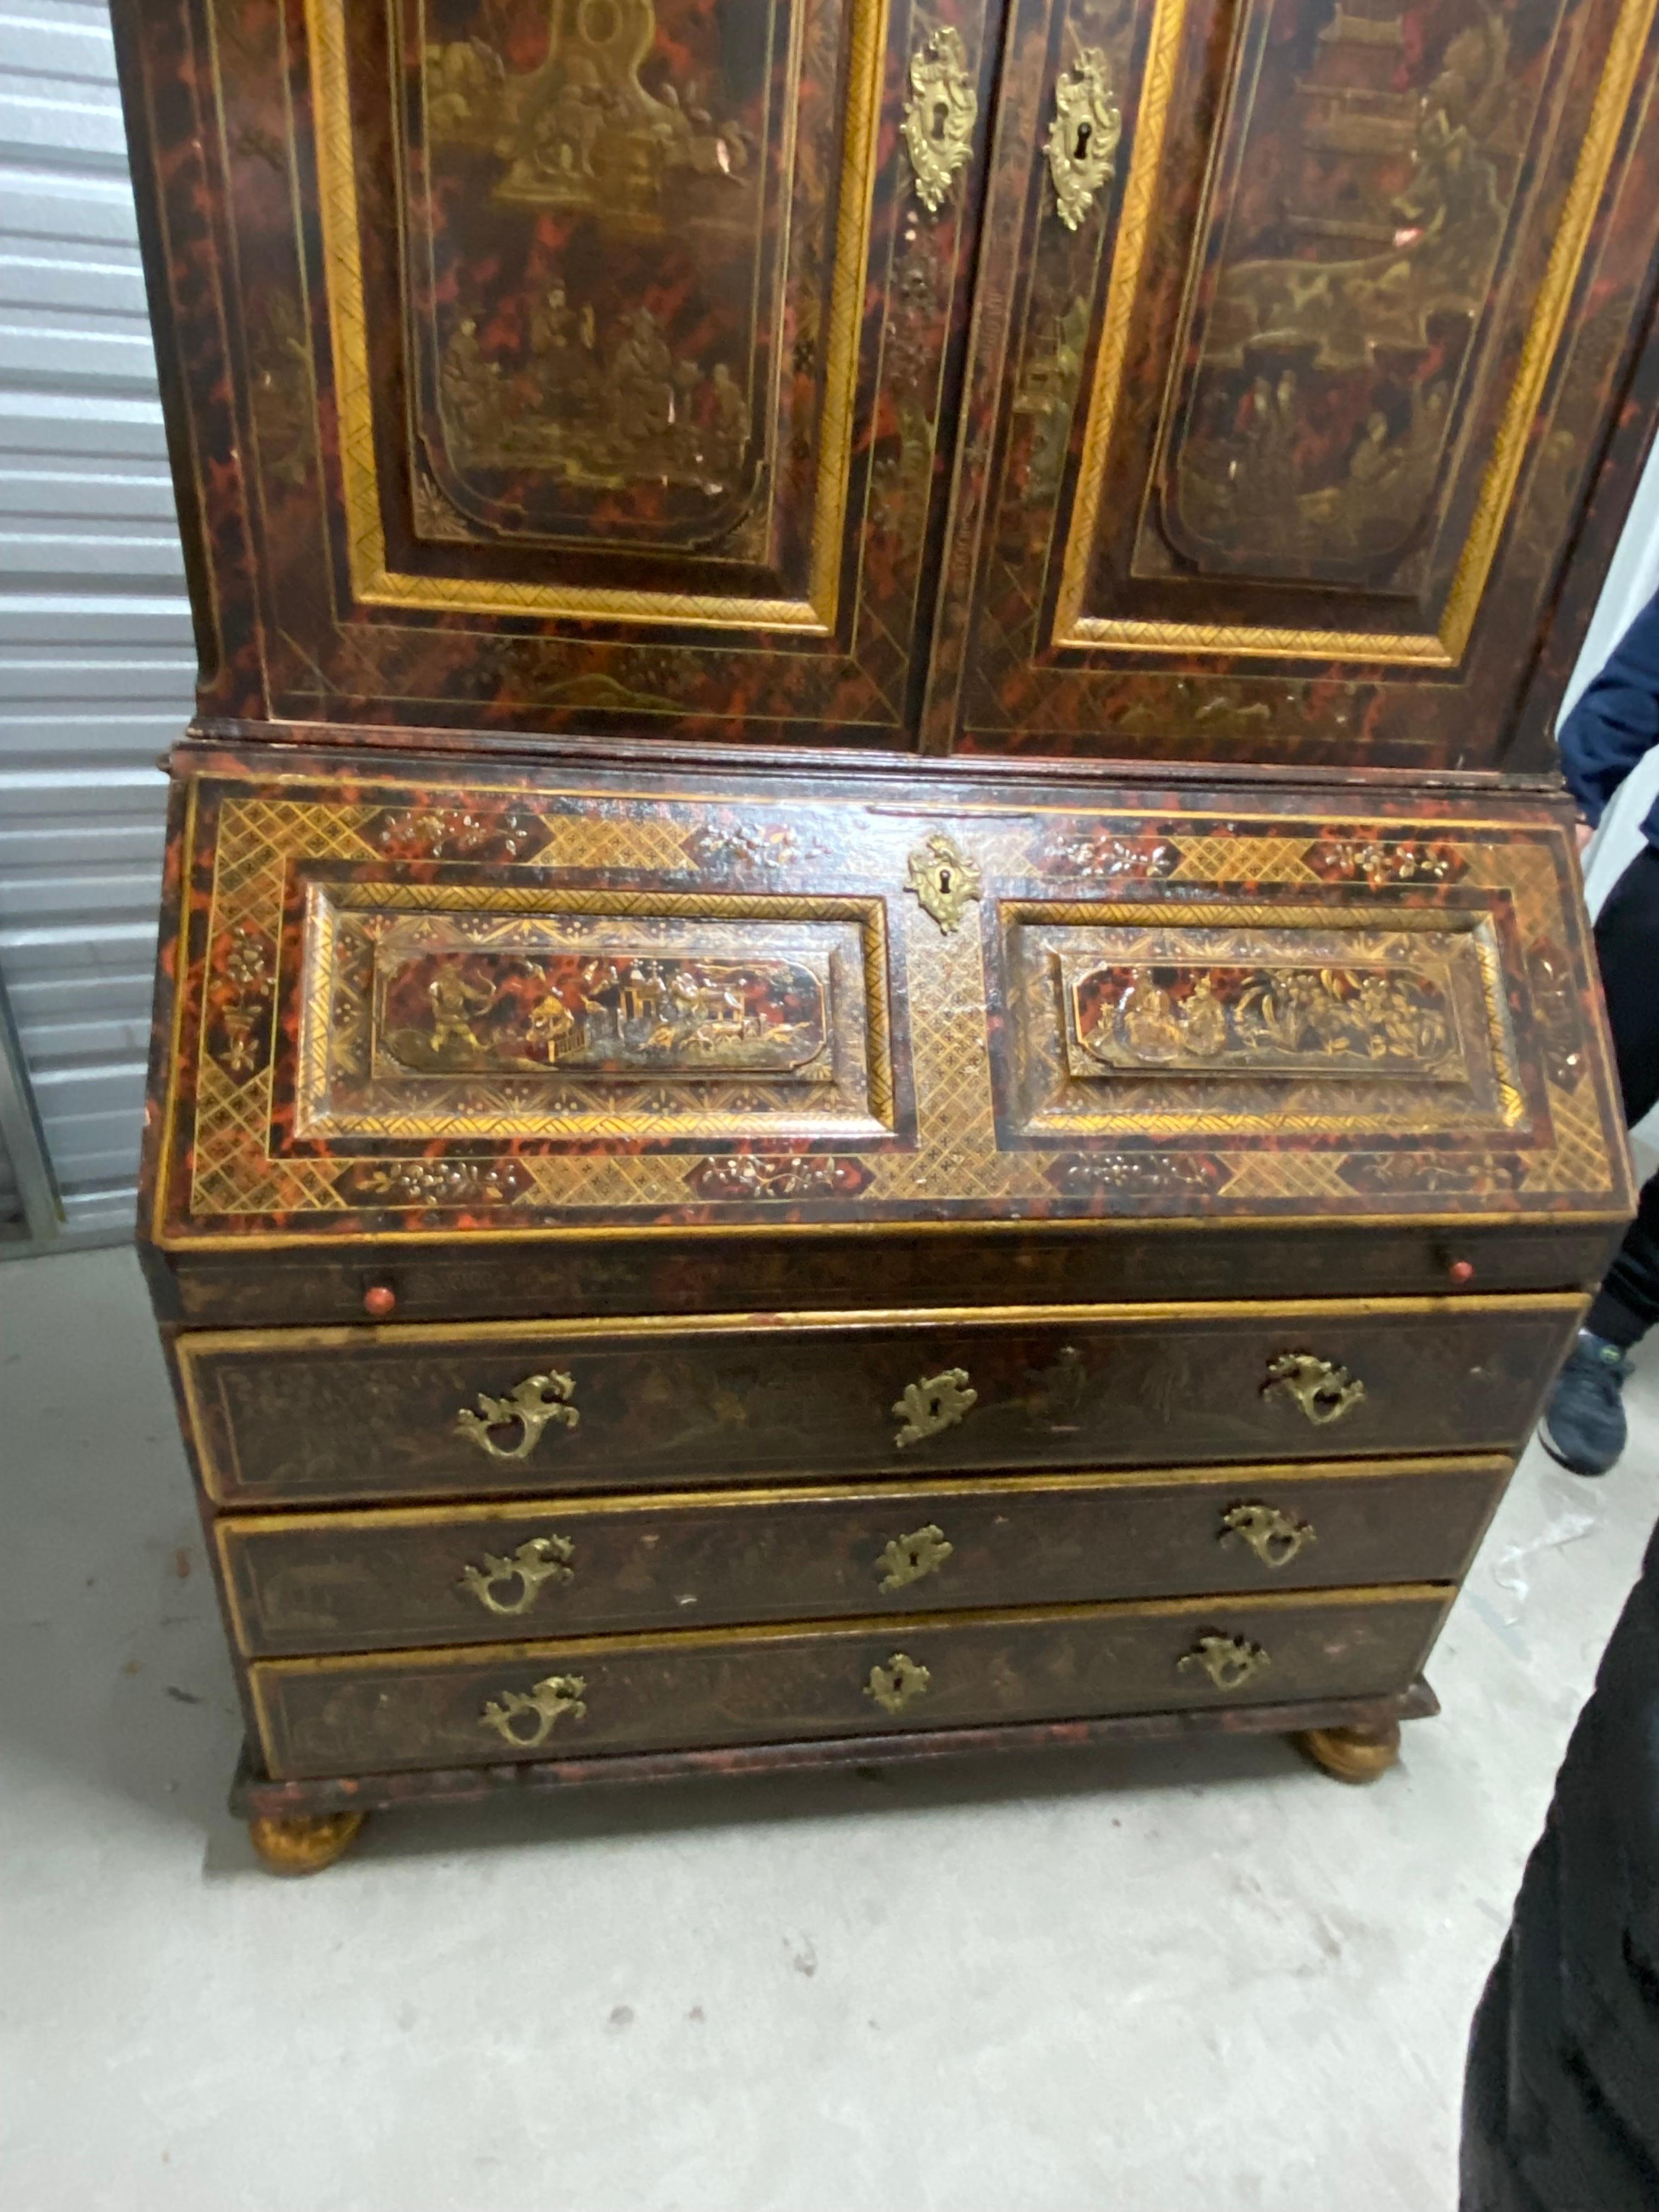 18th Century Northern European Tortoiseshell Lacquer Japanned Bureau Cabinet For Sale 4